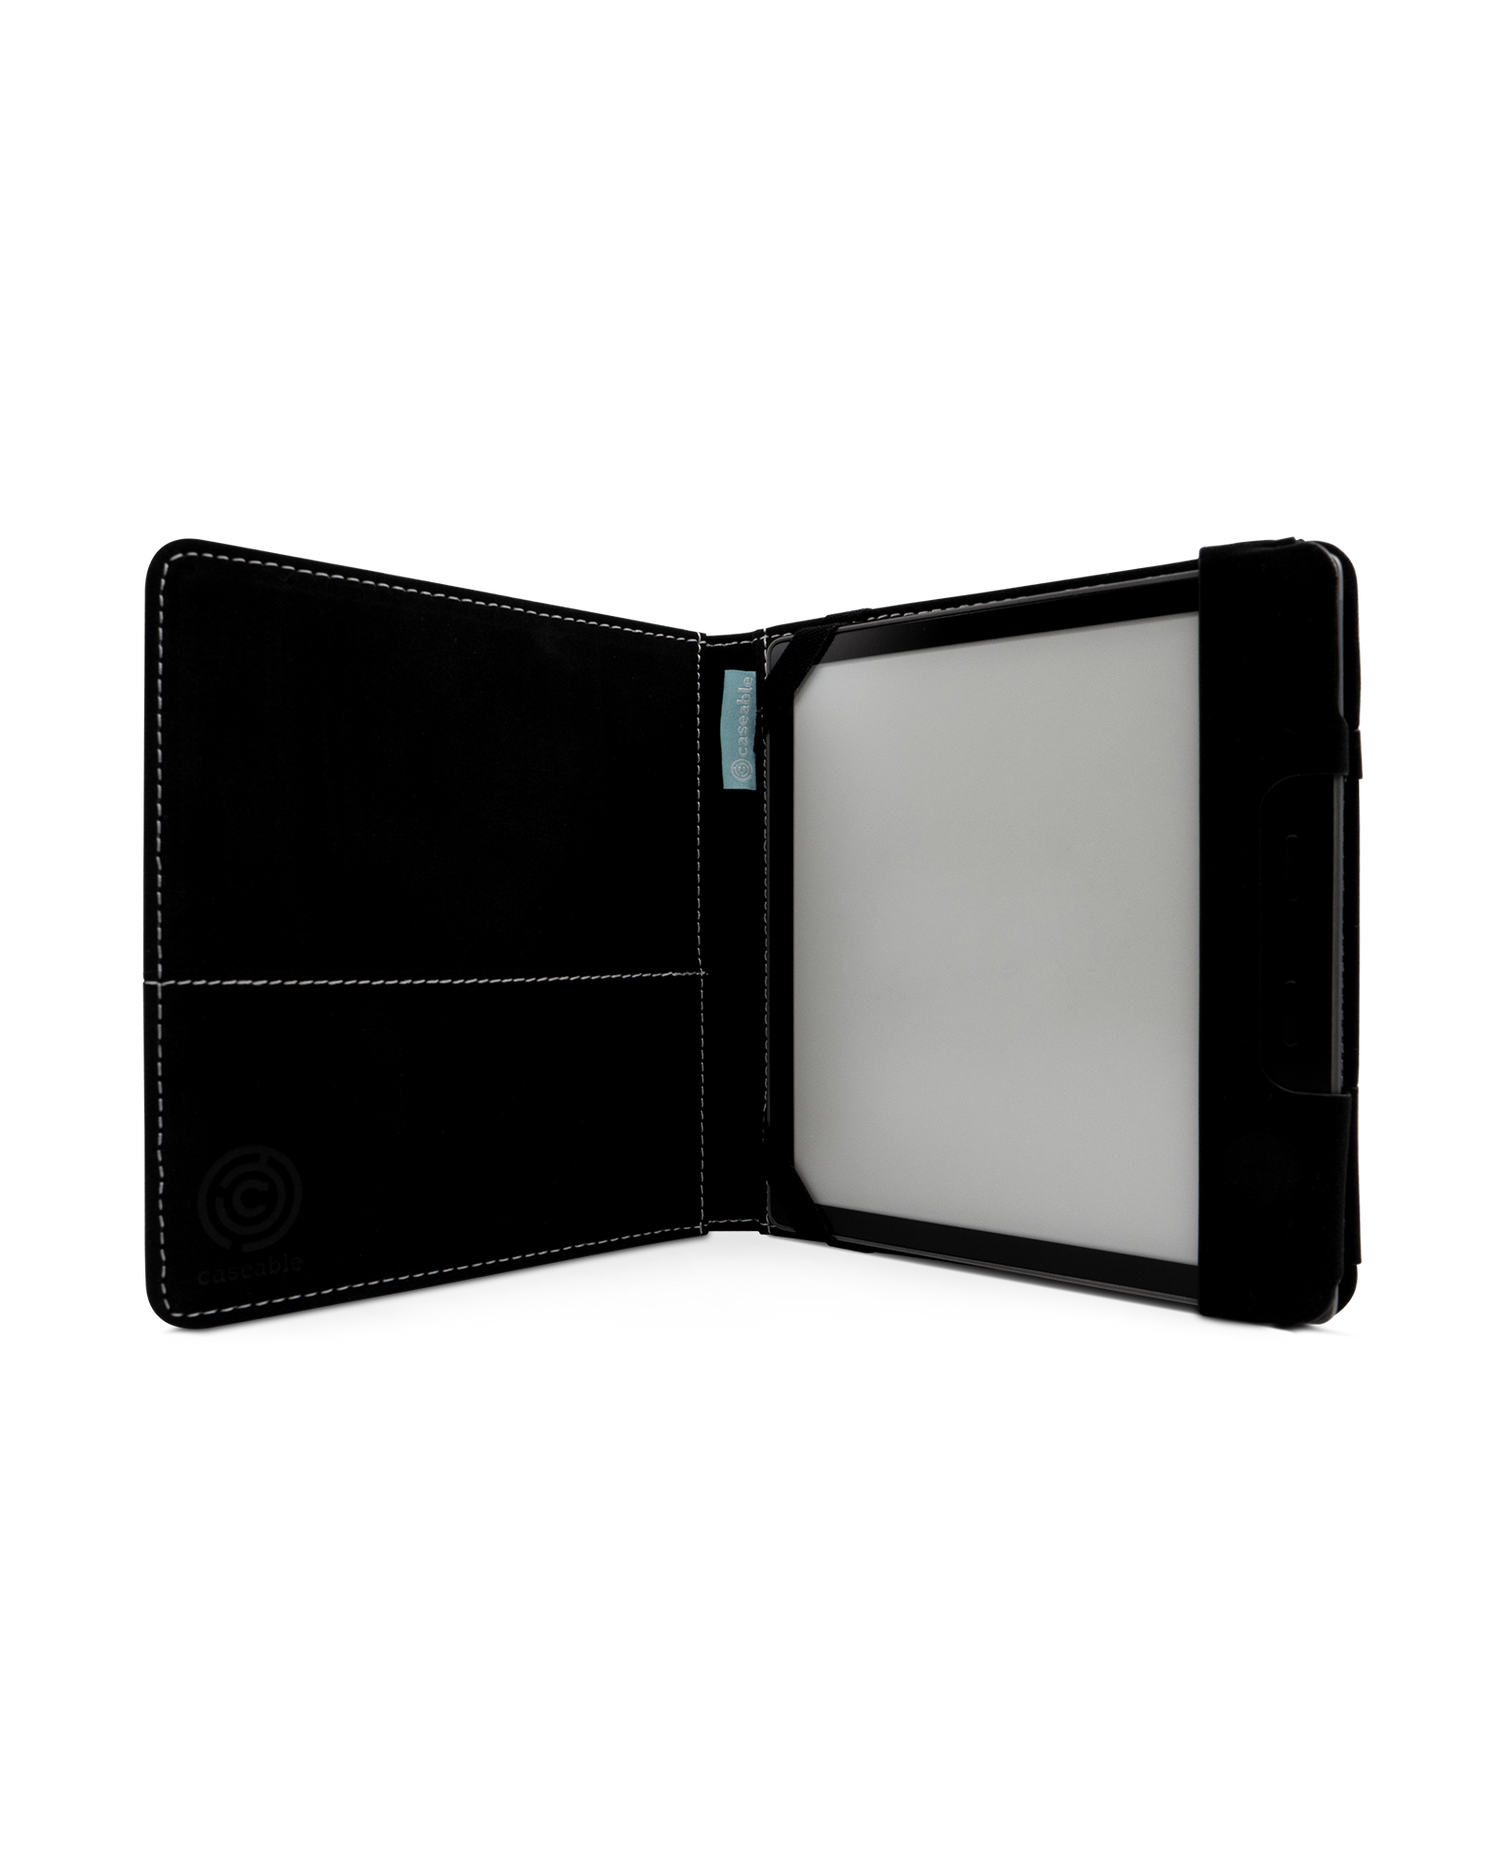 Wavey eReader Case for tolino vision 6: Opened interior view